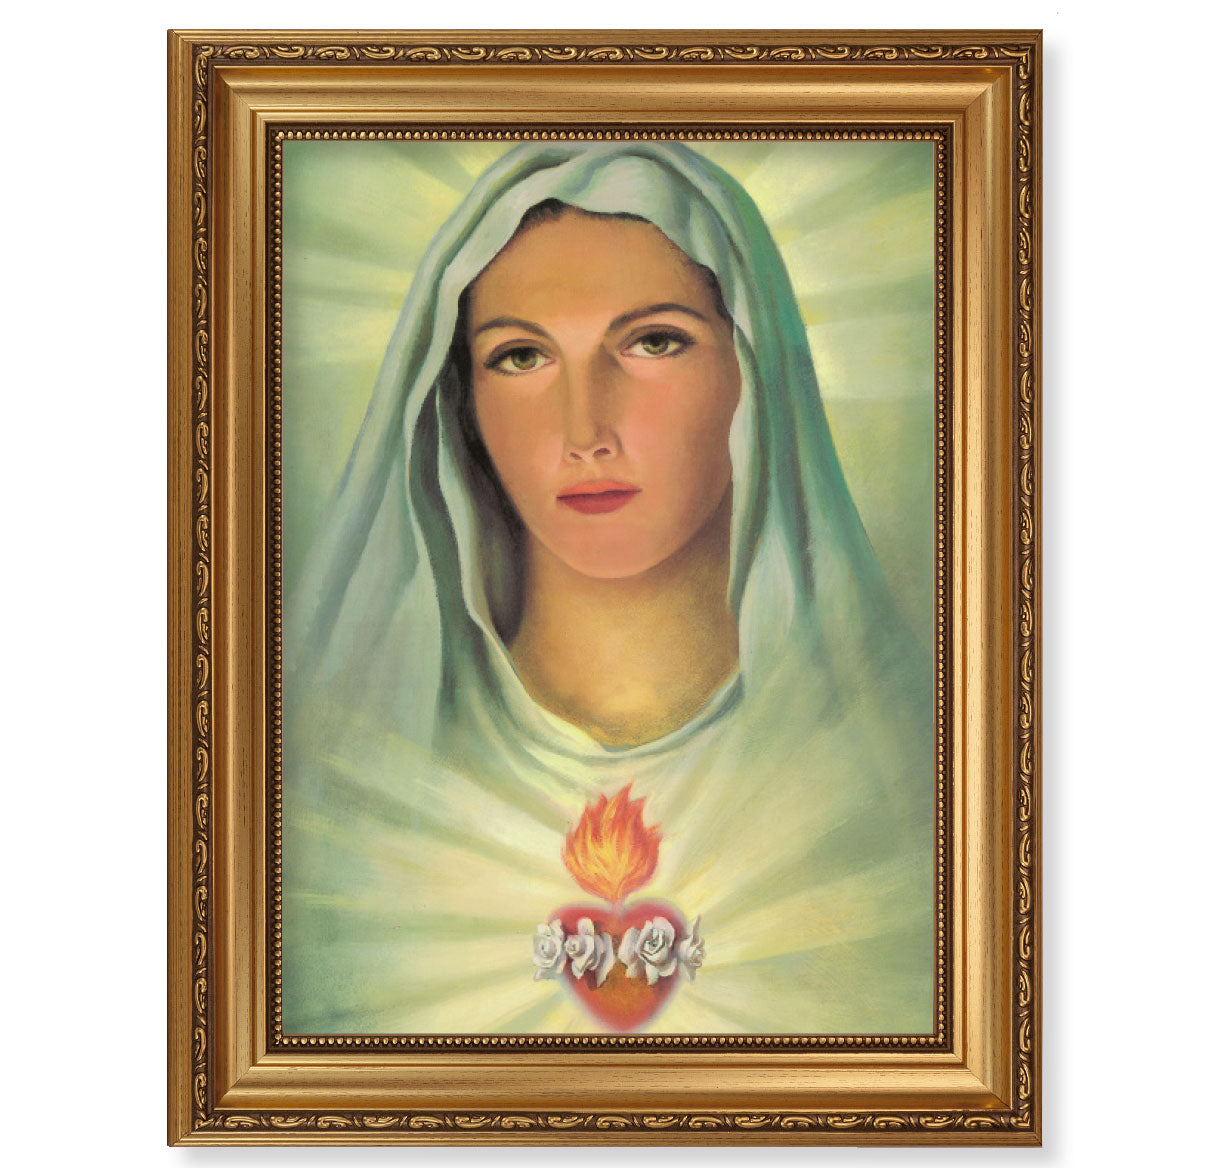 Immaculate Heart of Mary Antique Picture Framed Wall Art Decor, Extra Large, Antique Gold-Leaf Frame with Acanthus-Leaf Trim and Beaded Lip